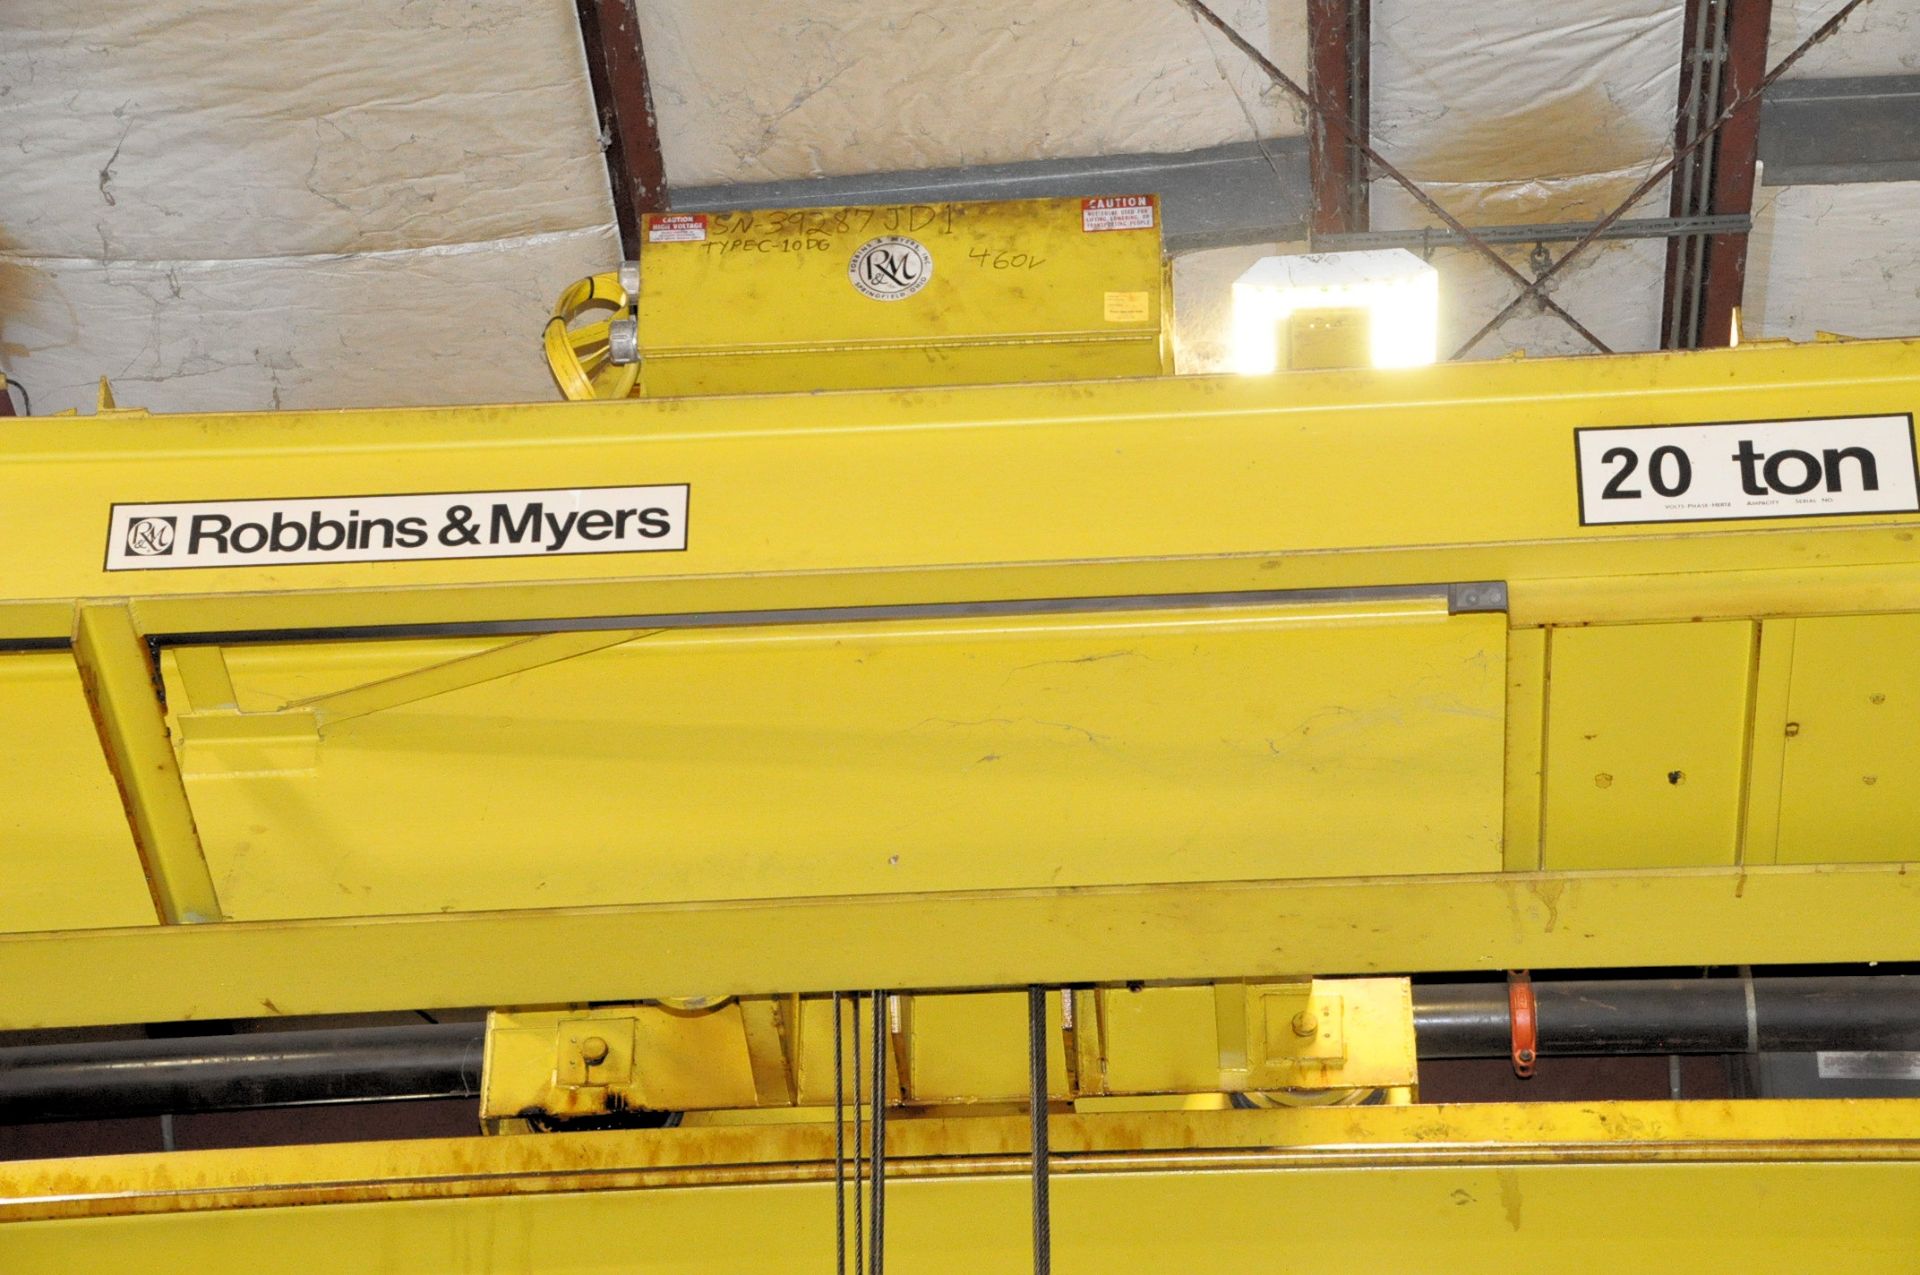 Robbins & Meyers 20 Ton Overhead Crane, Span and Hoist Only, No Rails, Remote Control and Pendant - Image 4 of 6